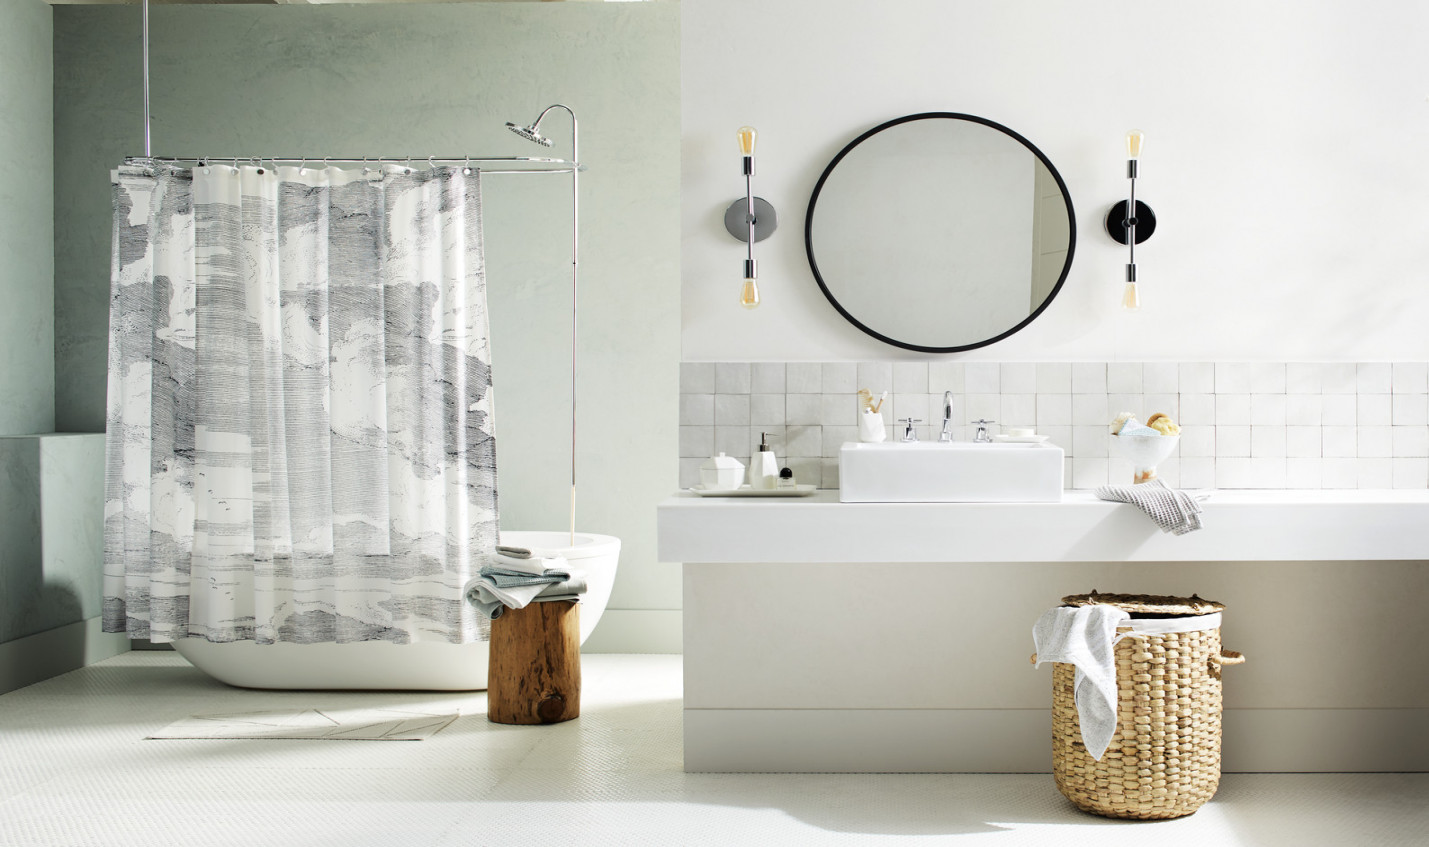 Introducing Water Street: Our Soft, Stylish and Sustainable Bath